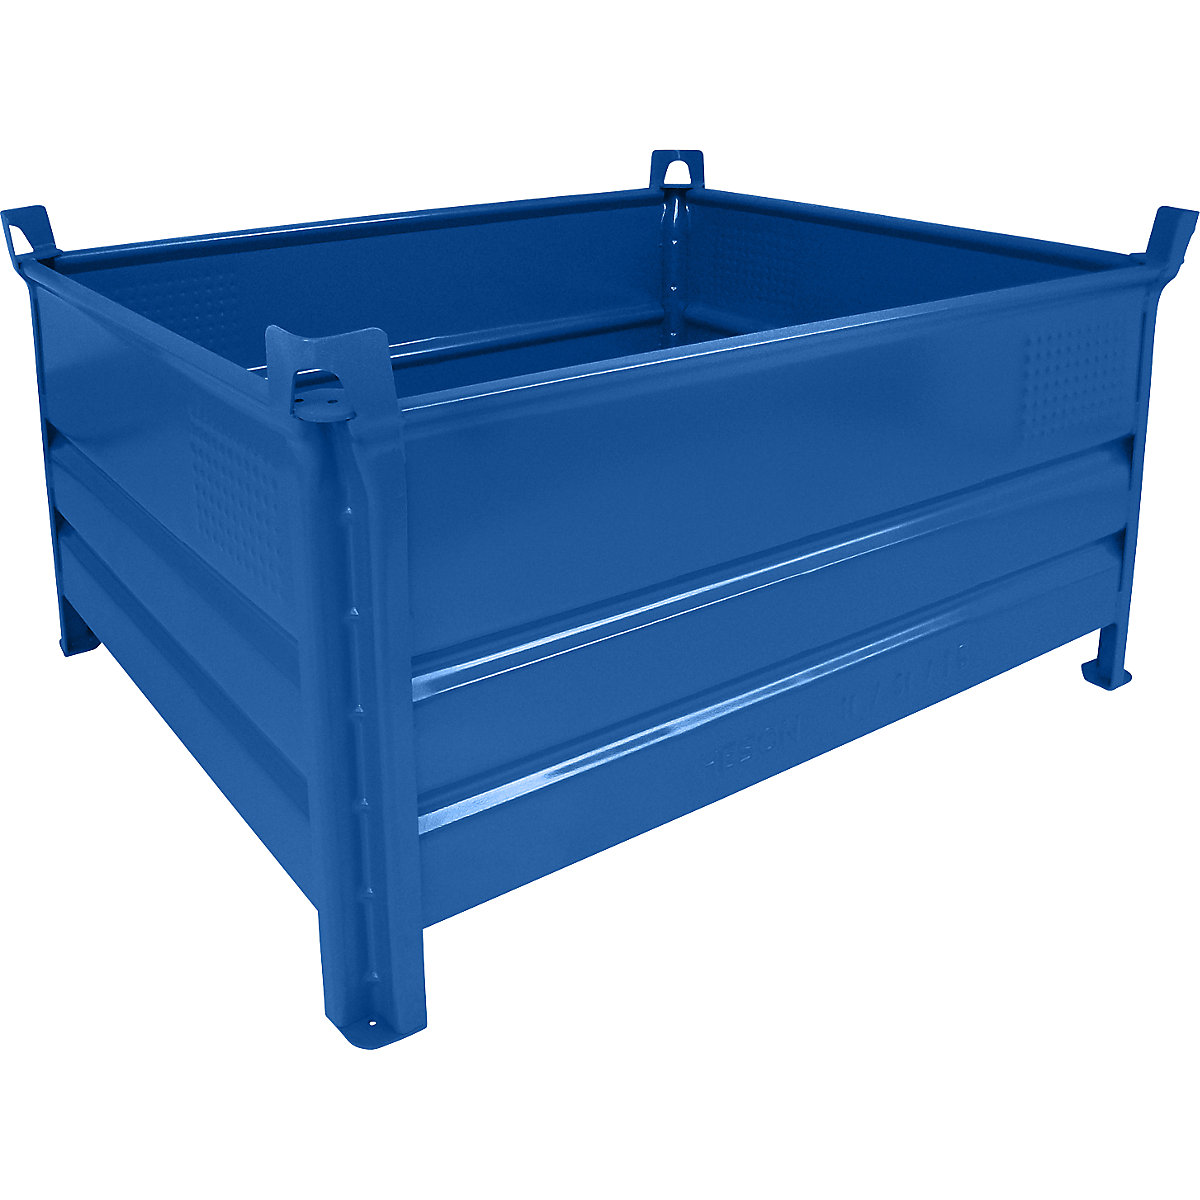 Solid panel box pallet – Heson, WxL 1000 x 1200 mm, max. load 1000 kg, blue, 5+ items-7